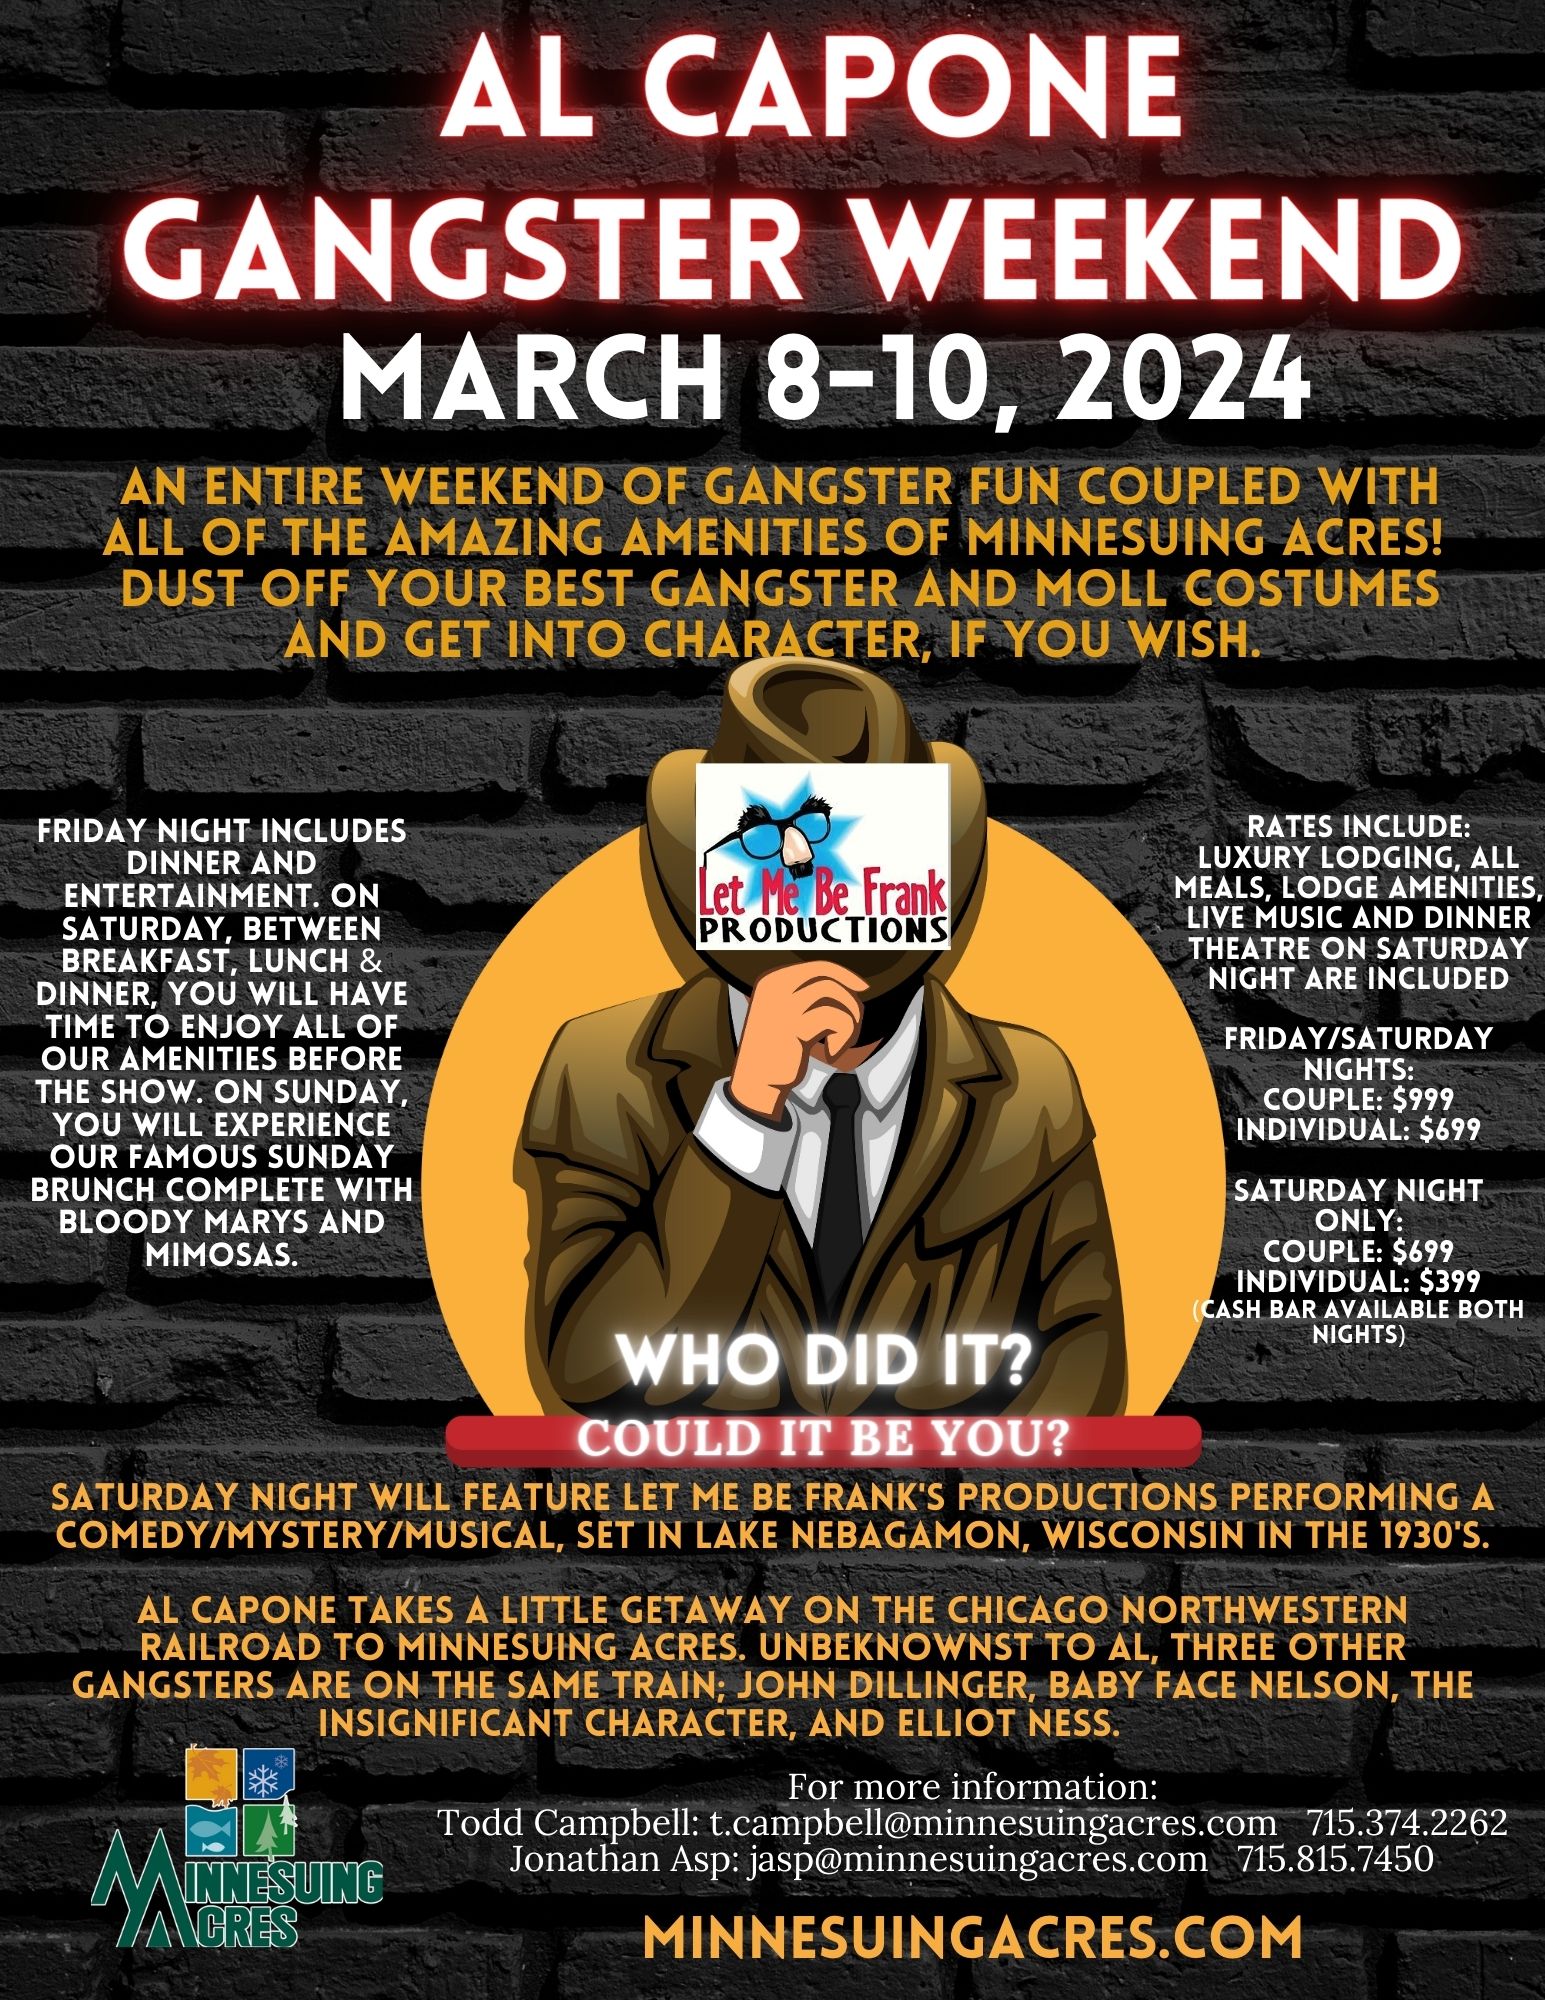 A Brochure for Al Capone Gangster Weekend.